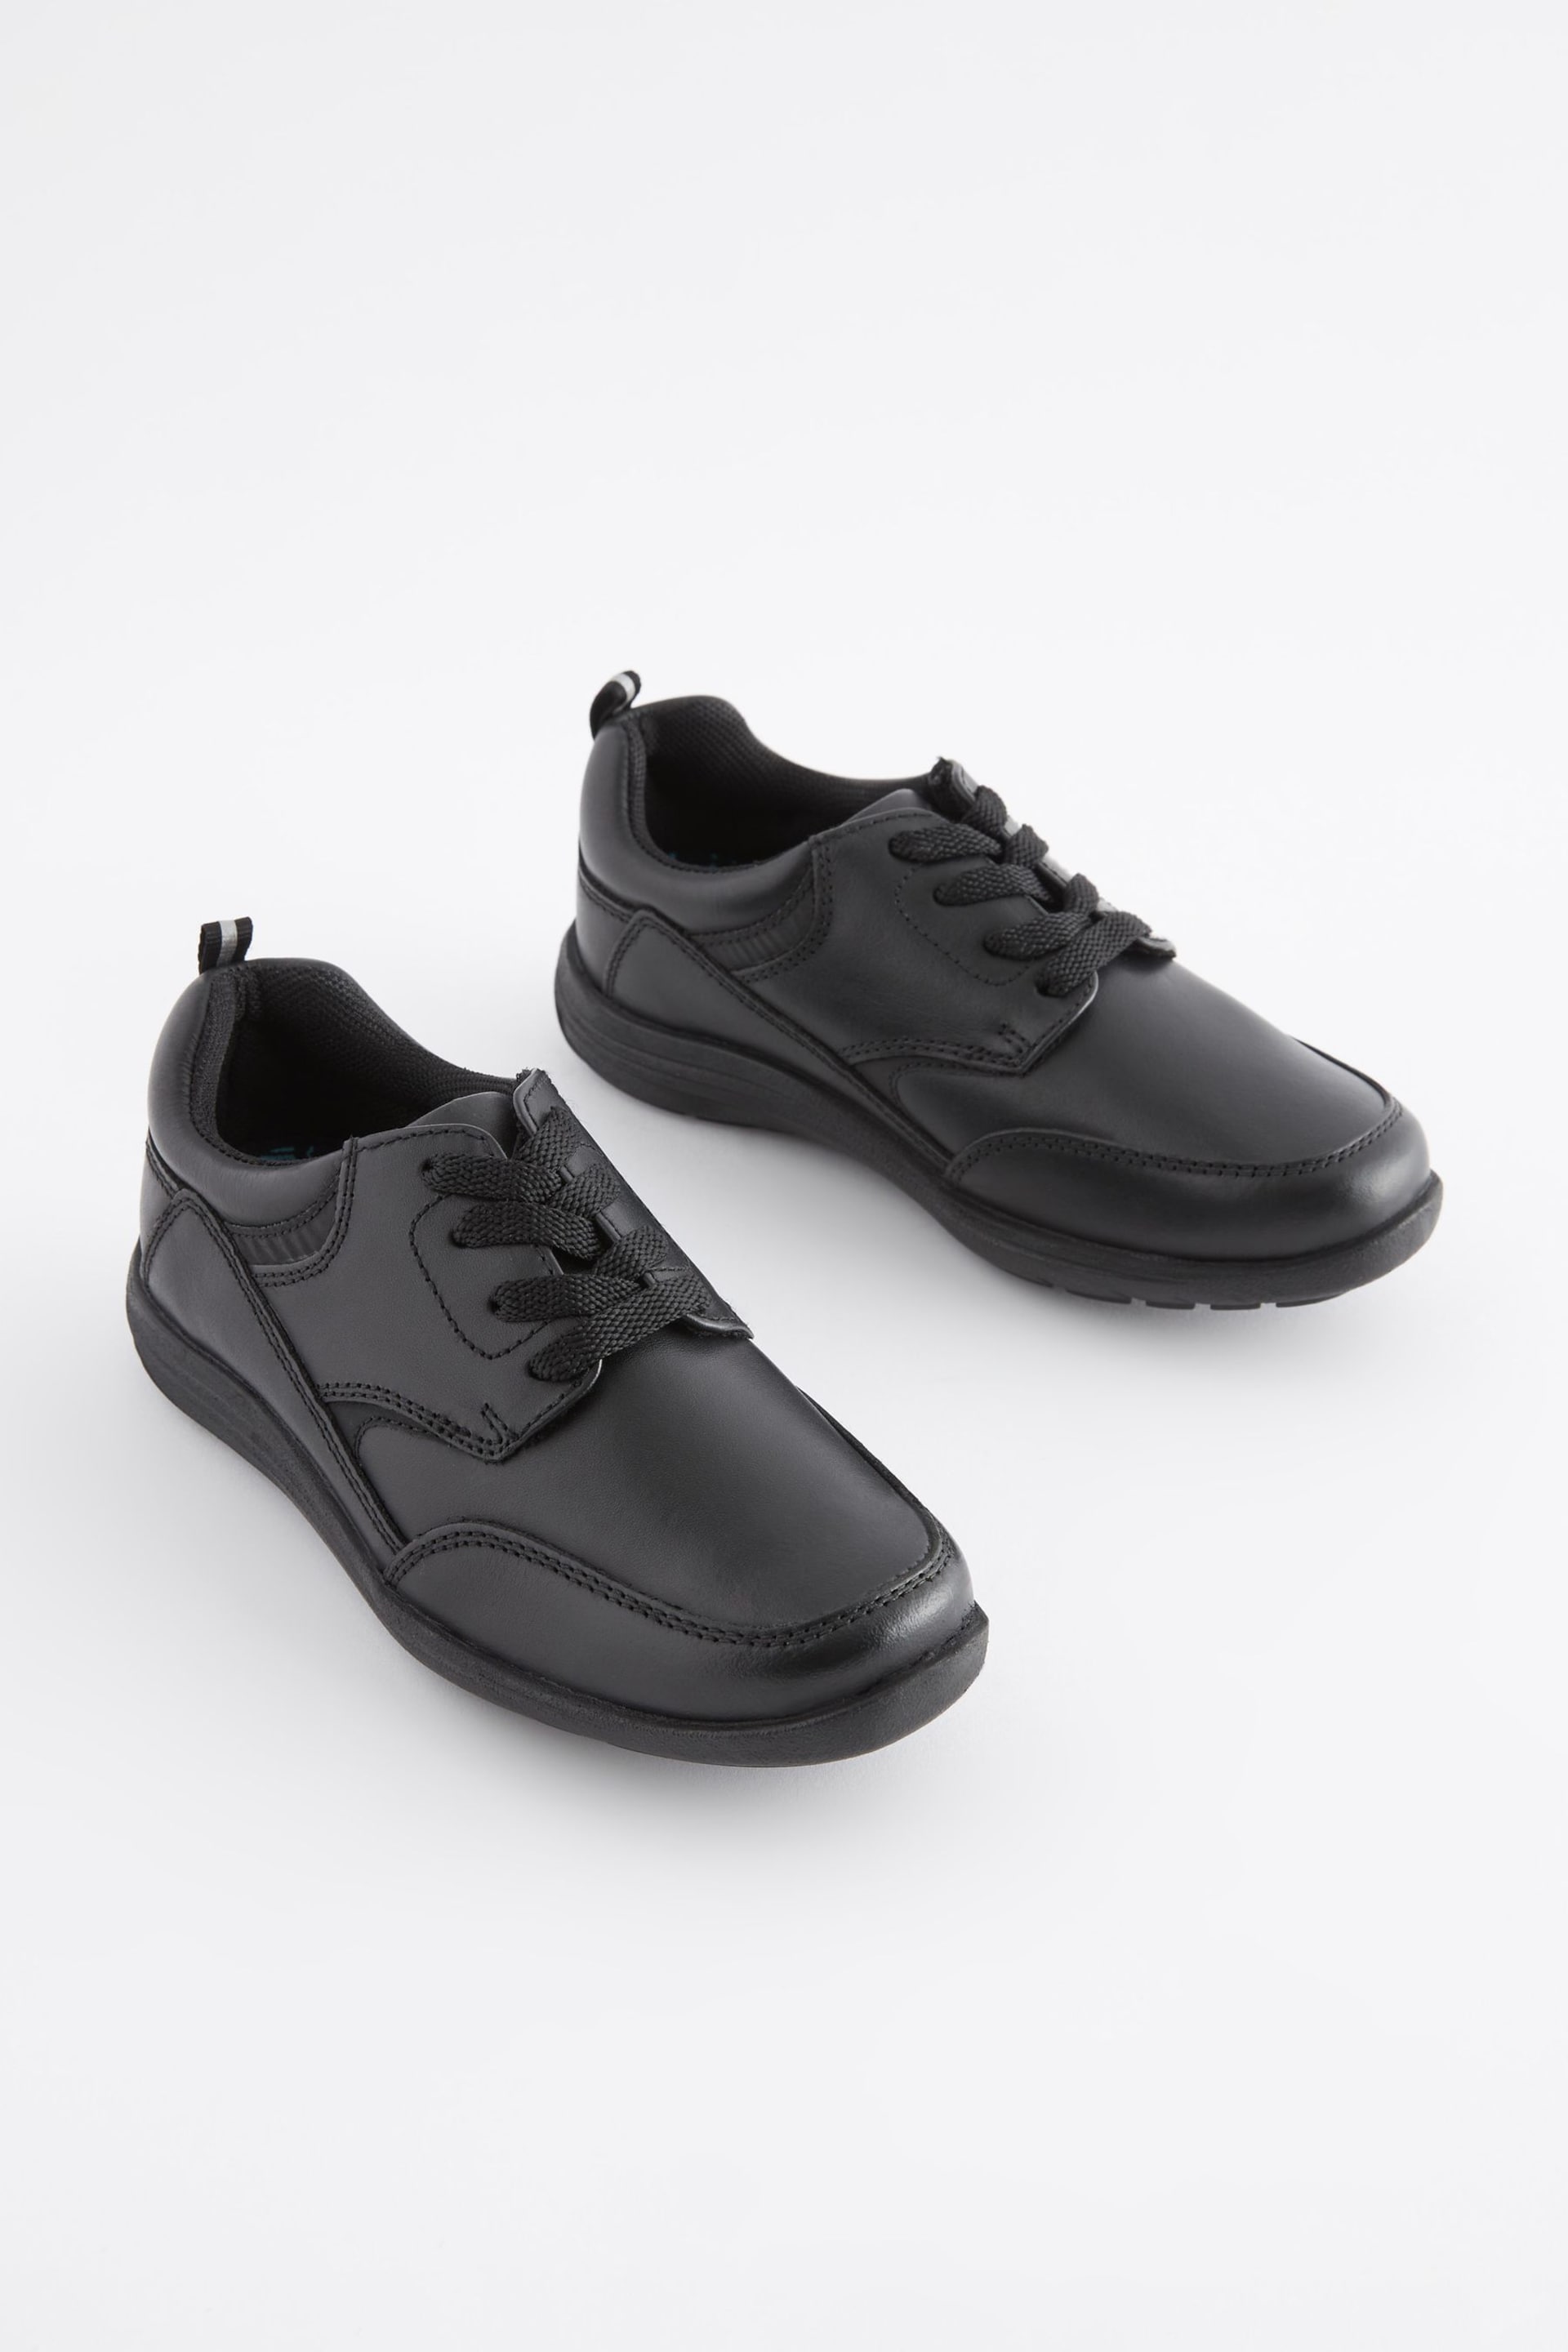 Black Standard Fit (F) School Leather Lace-Up Shoes - Image 1 of 6